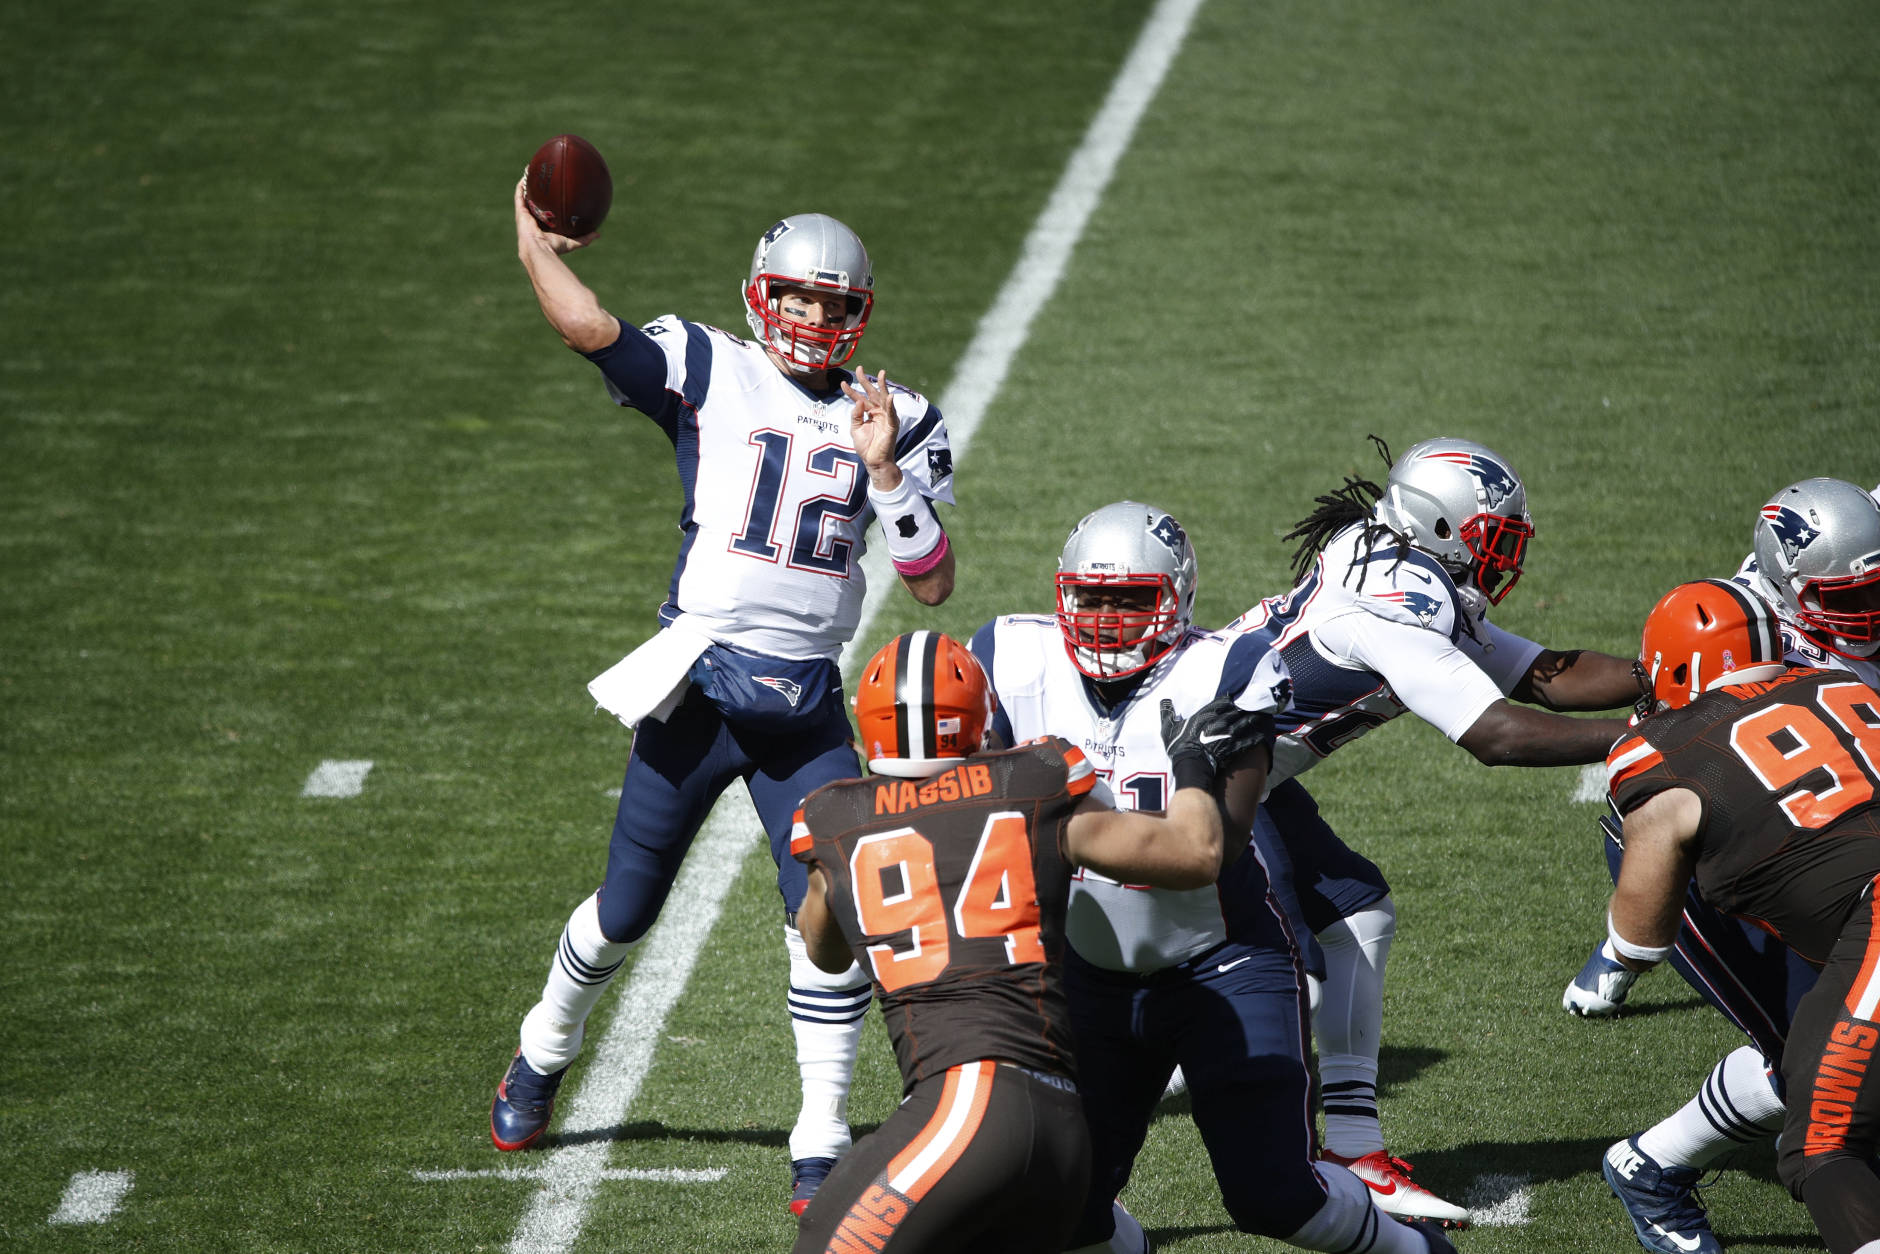 CLEVELAND, OH - OCTOBER 09: Tom Brady #12 of the New England Patriots passes in the first quarter of the game against the Cleveland Browns at FirstEnergy Stadium on October 9, 2016 in Cleveland, Ohio. (Photo by Joe Robbins/Getty Images)